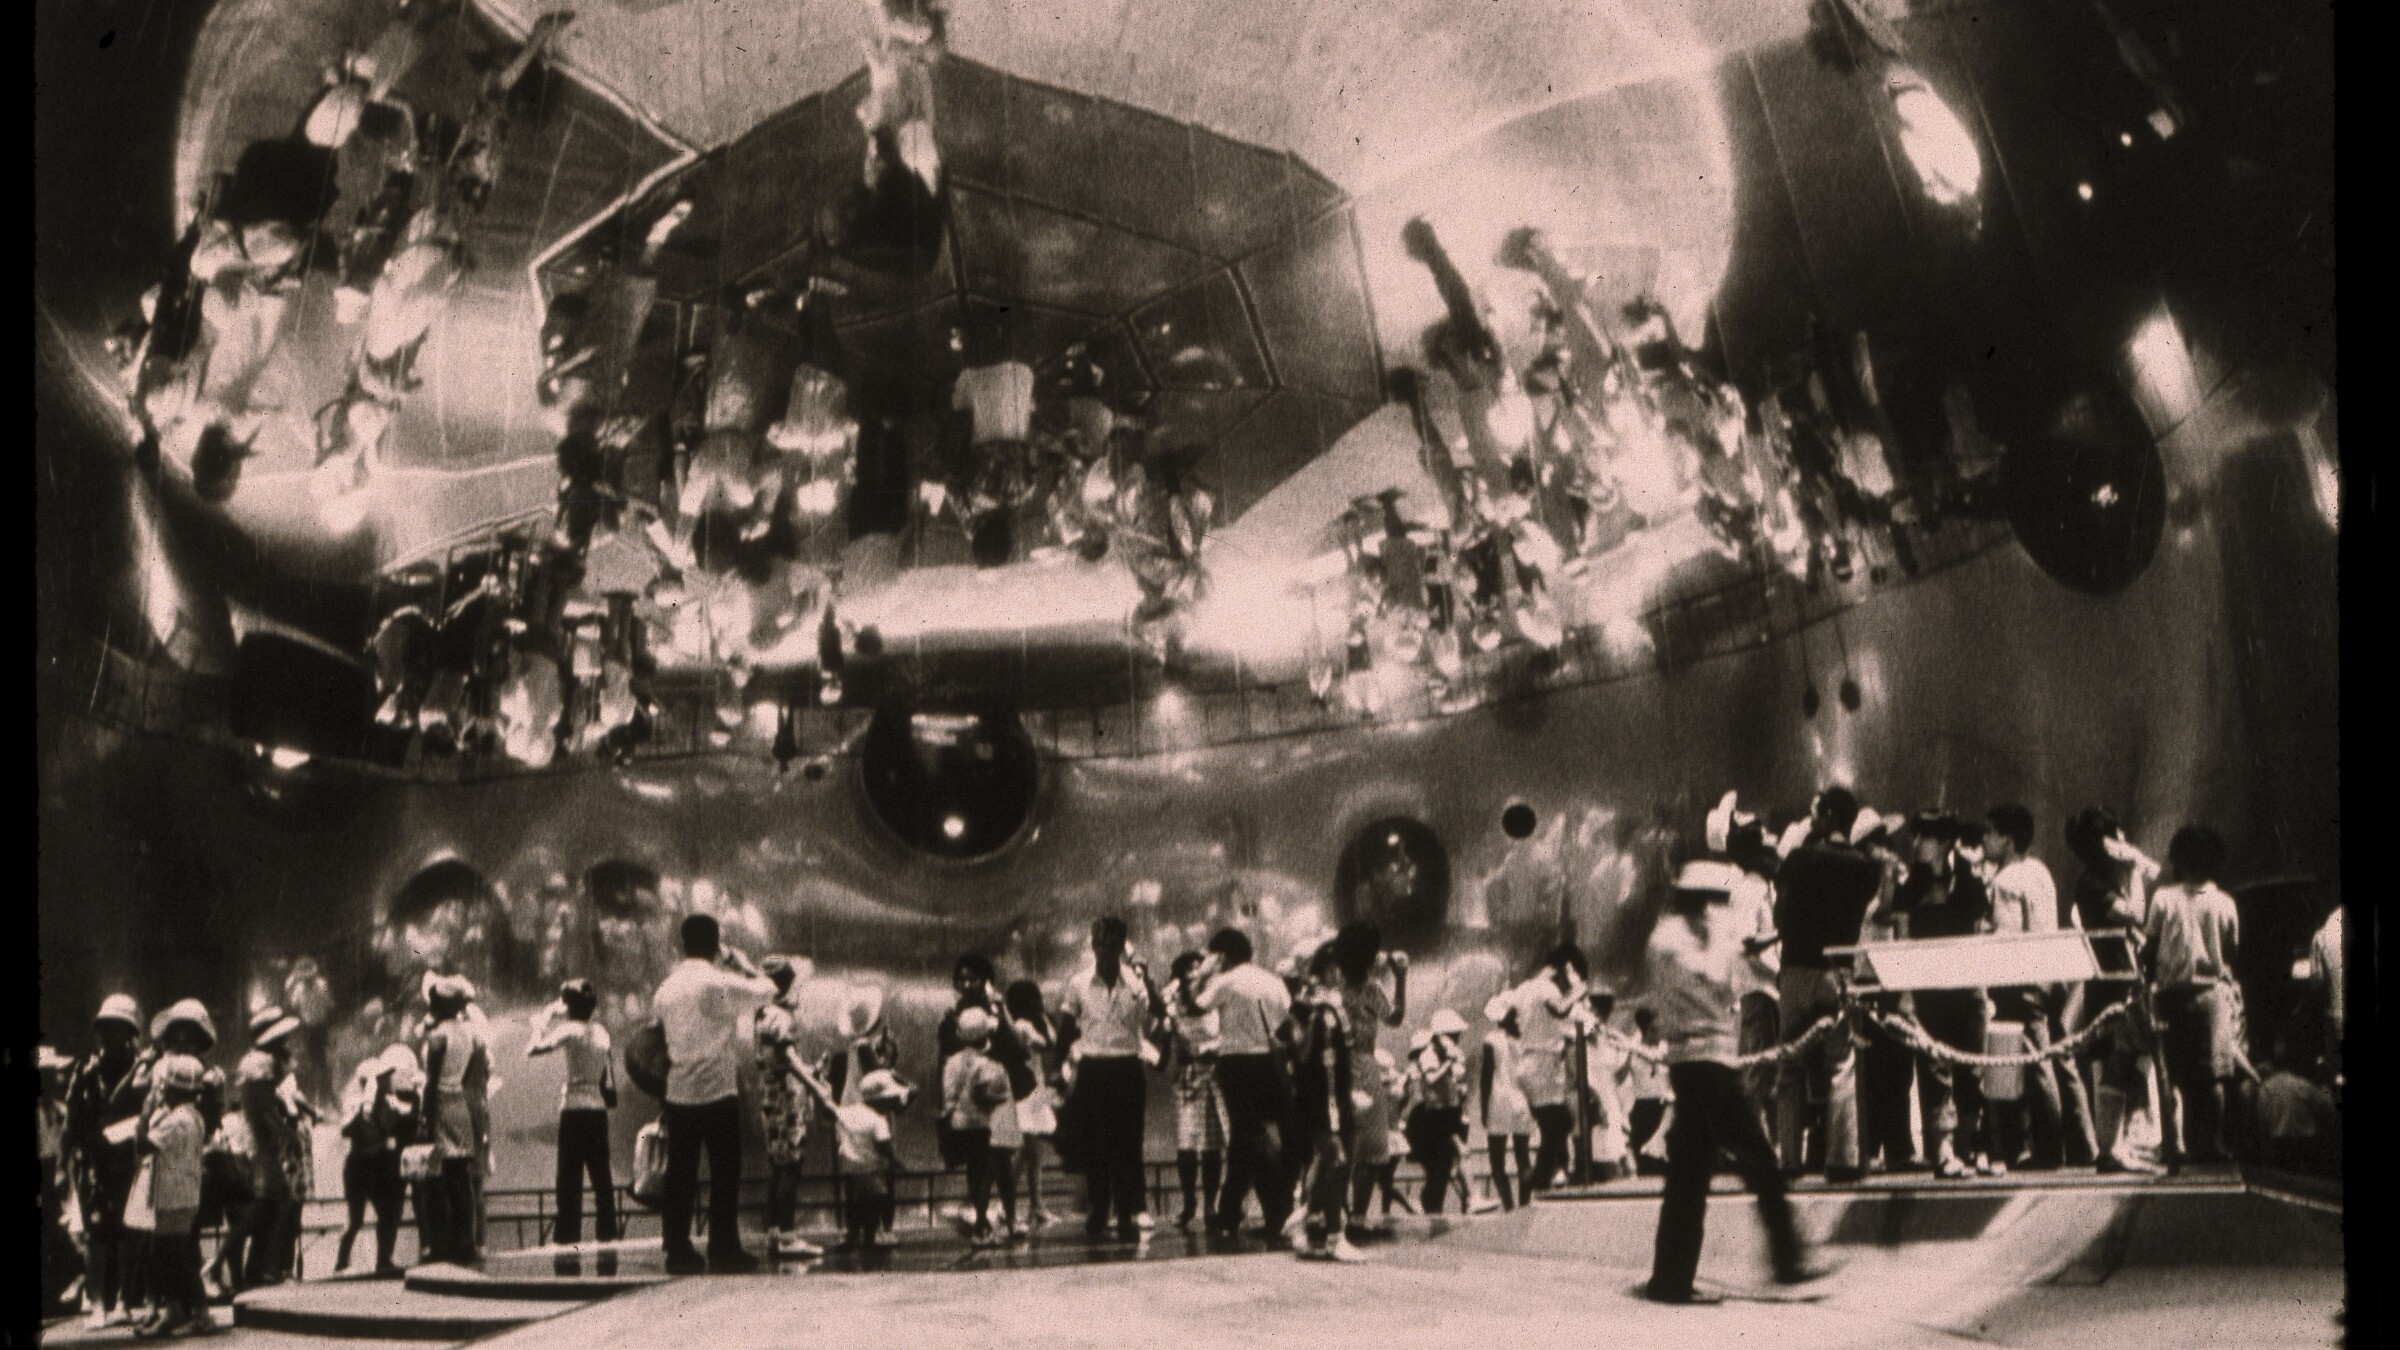 Black and white photograph of various figures standing below a mirrored dome featuring a spherical reflection